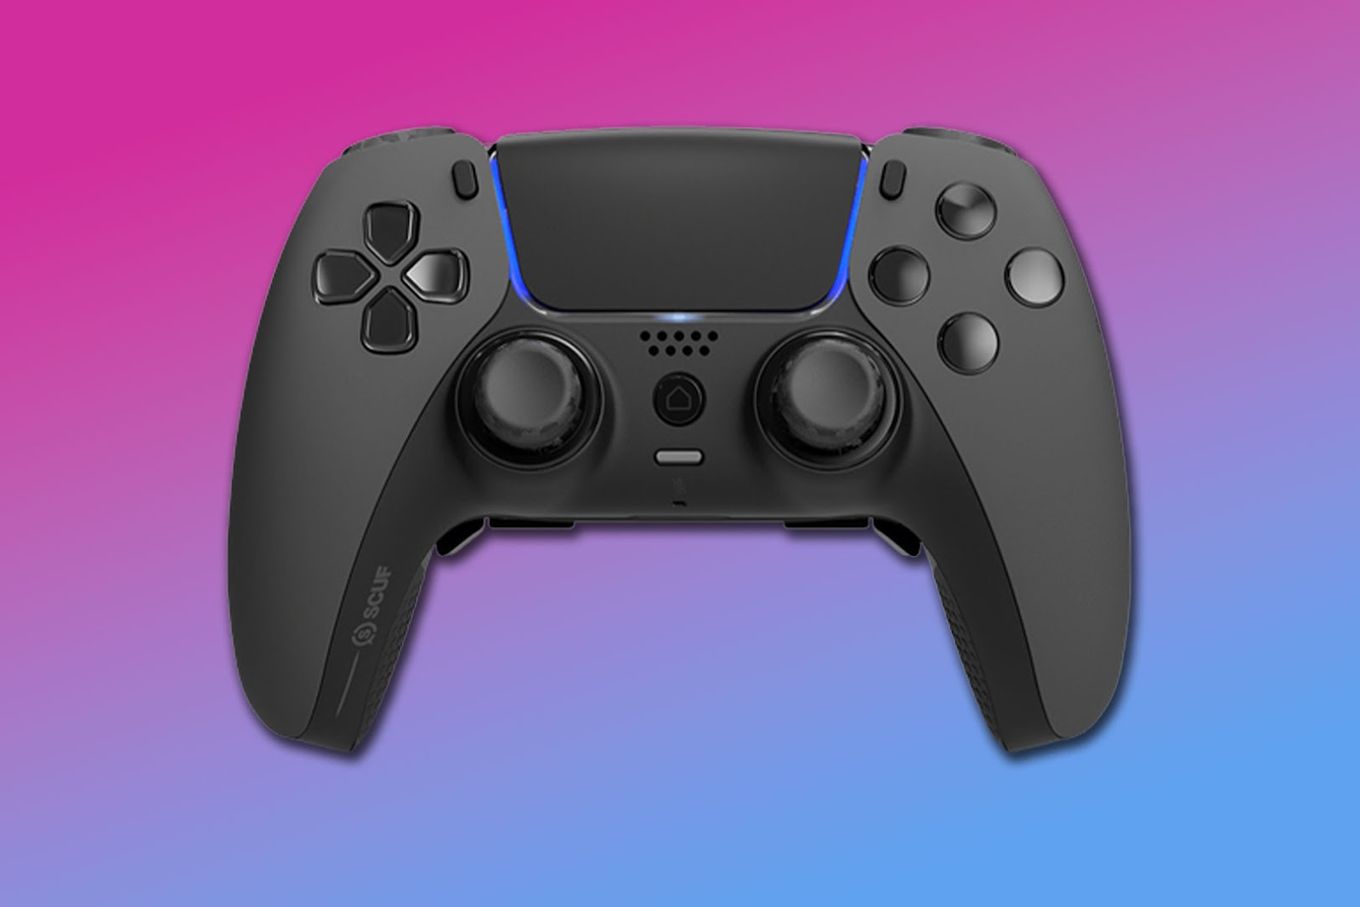 Scuf Reflex - Other Controller to Use with PS5